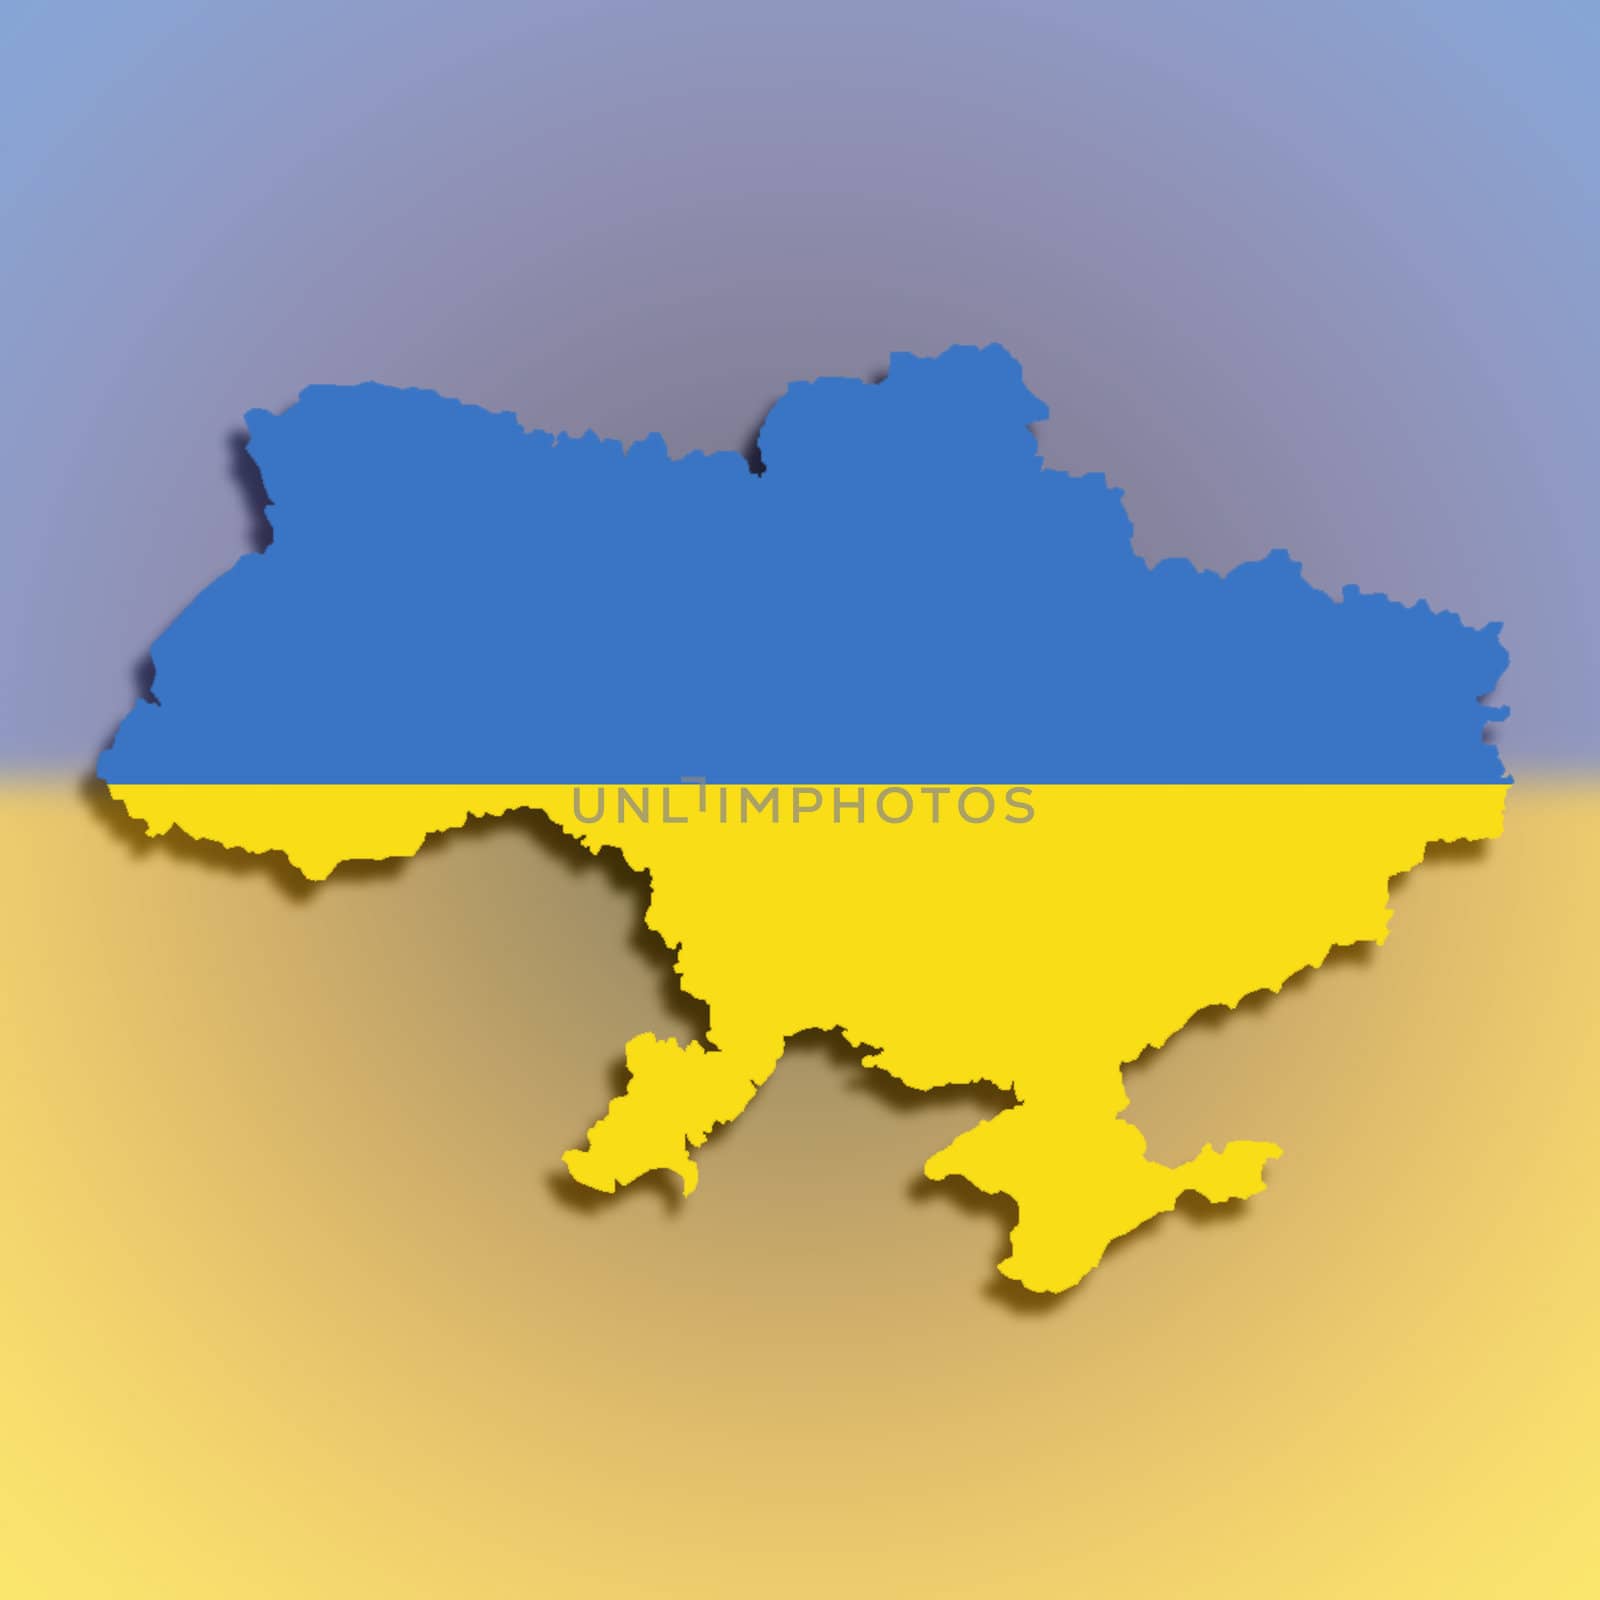 Map of the Ukraine filled with flag by michaklootwijk